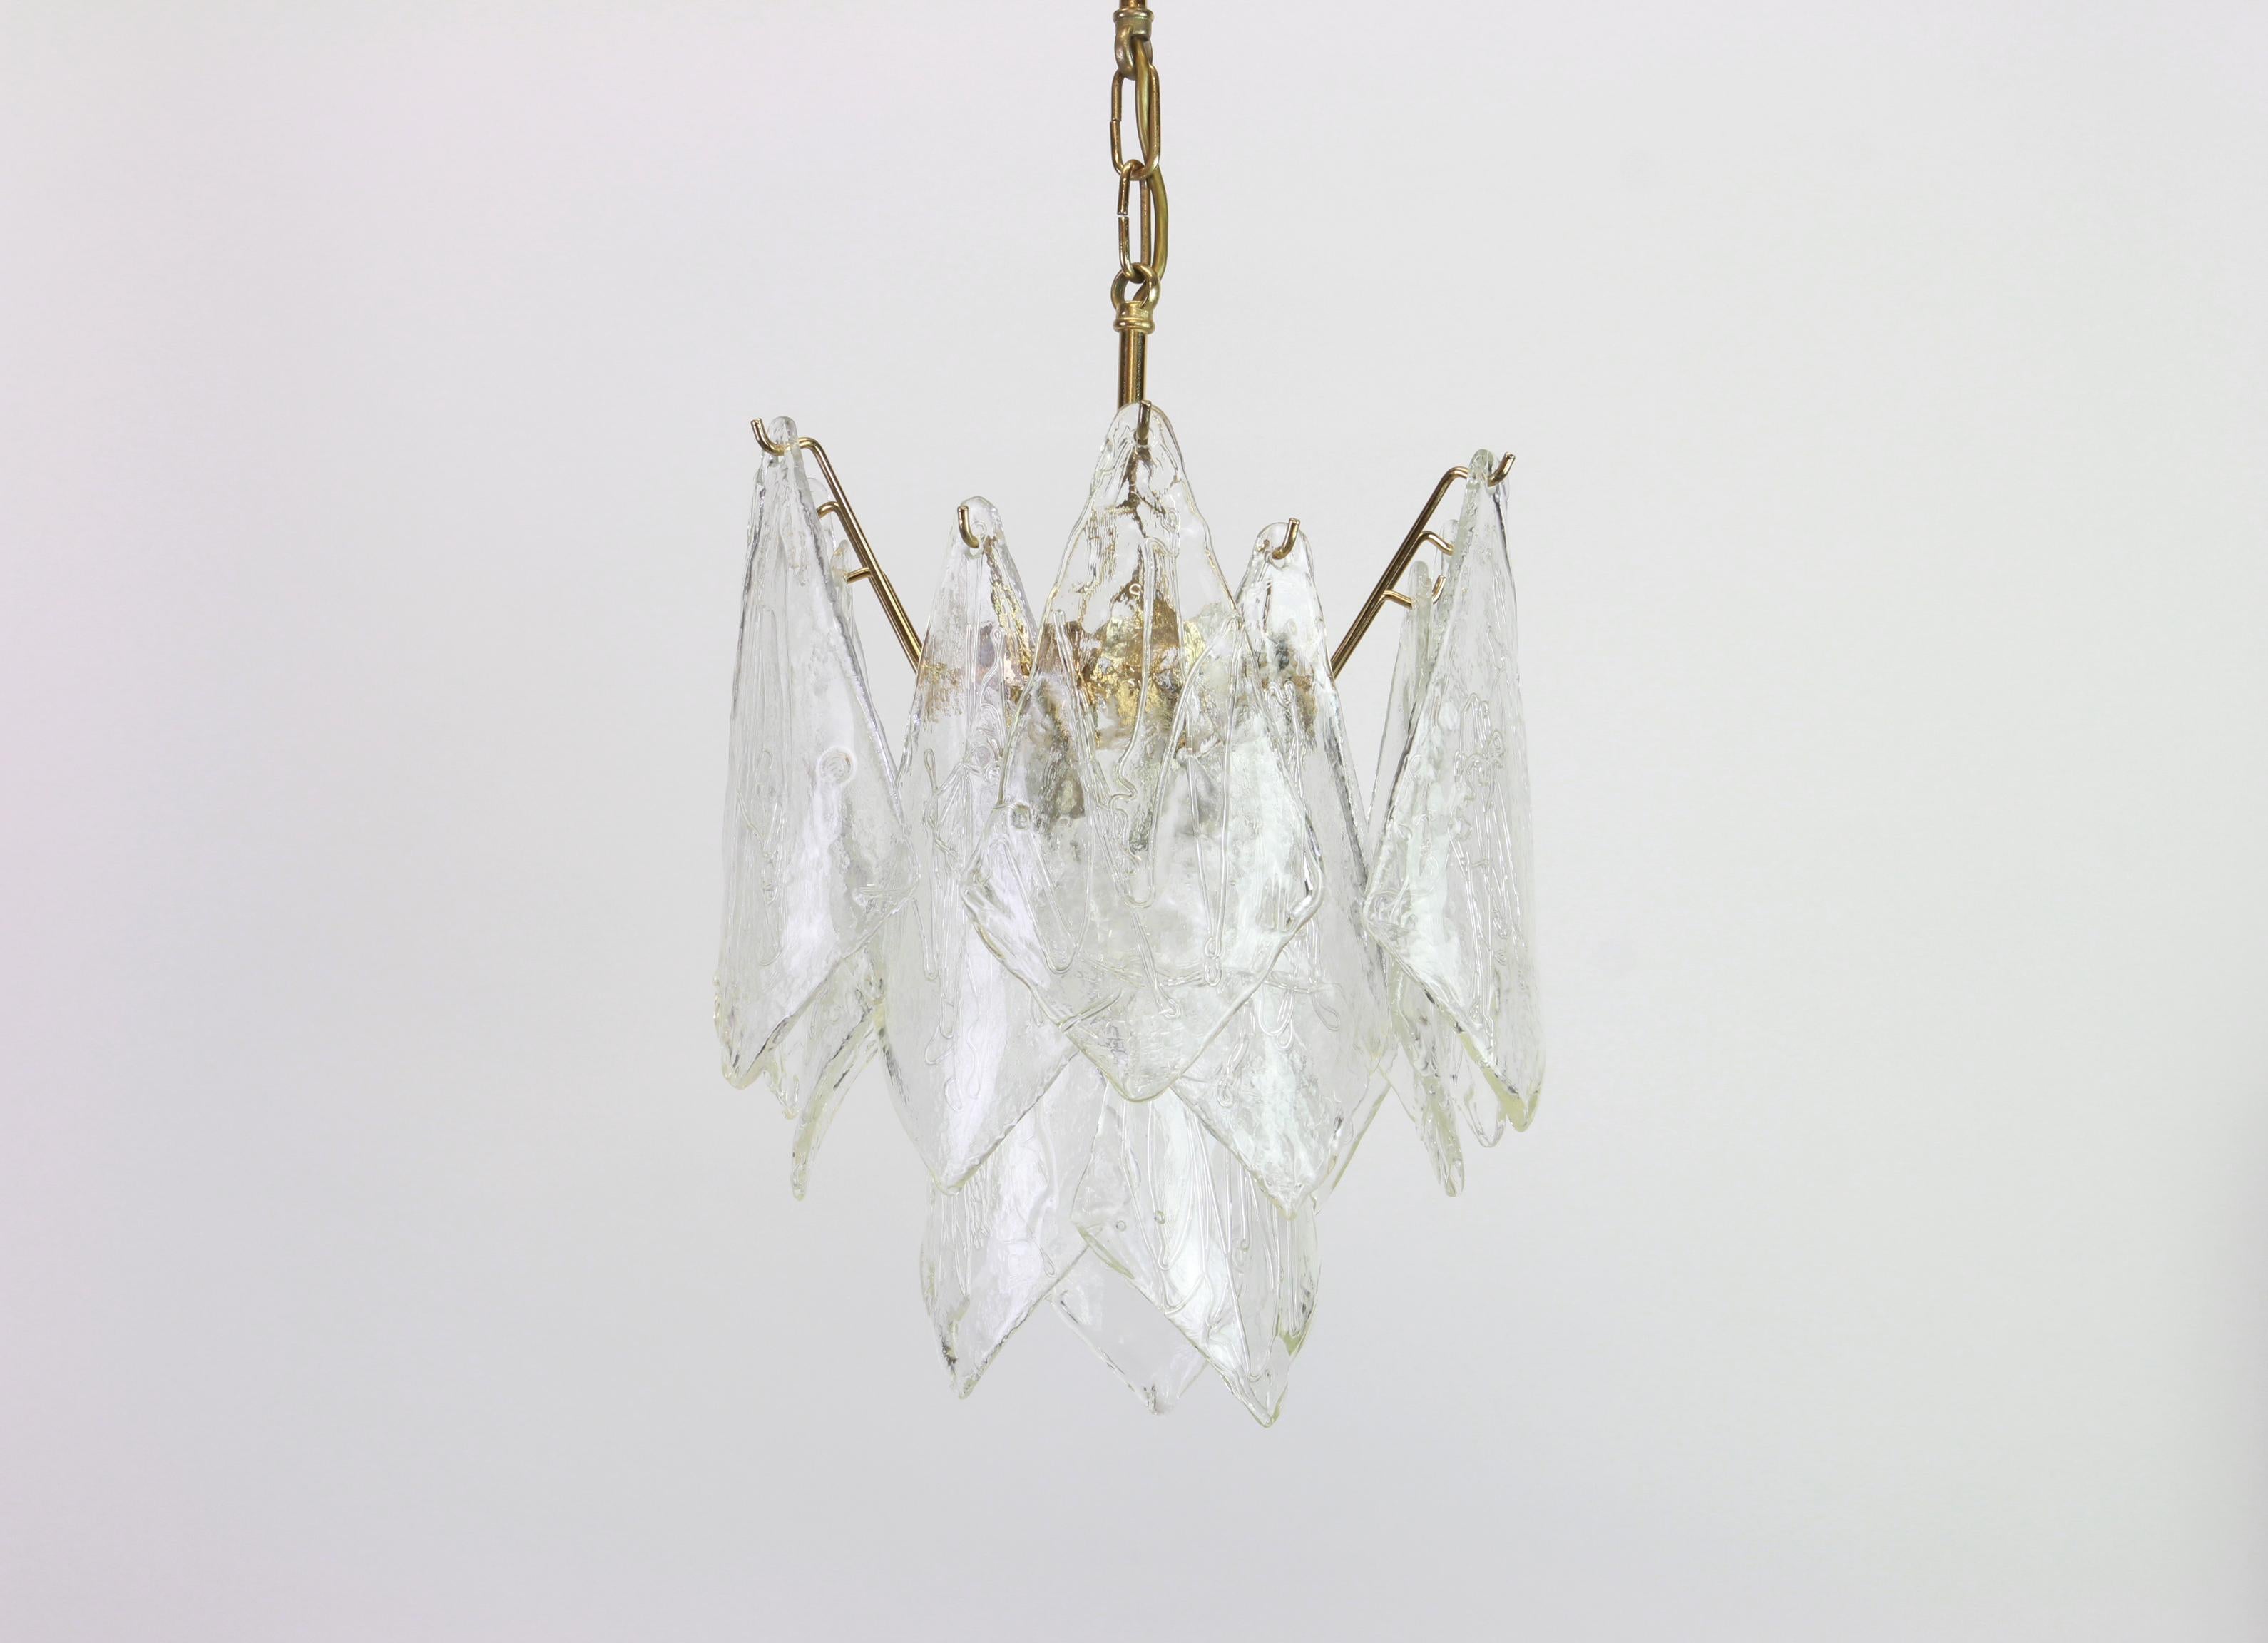 A stunning Murano glass Chandelier designed by Carlo Nason for Mazzega, Italy, manufactured in the 1970s. 
The chandelier is composed of 15 thick textured glass elements attached to a brass metal frame.

High quality - very good condition.